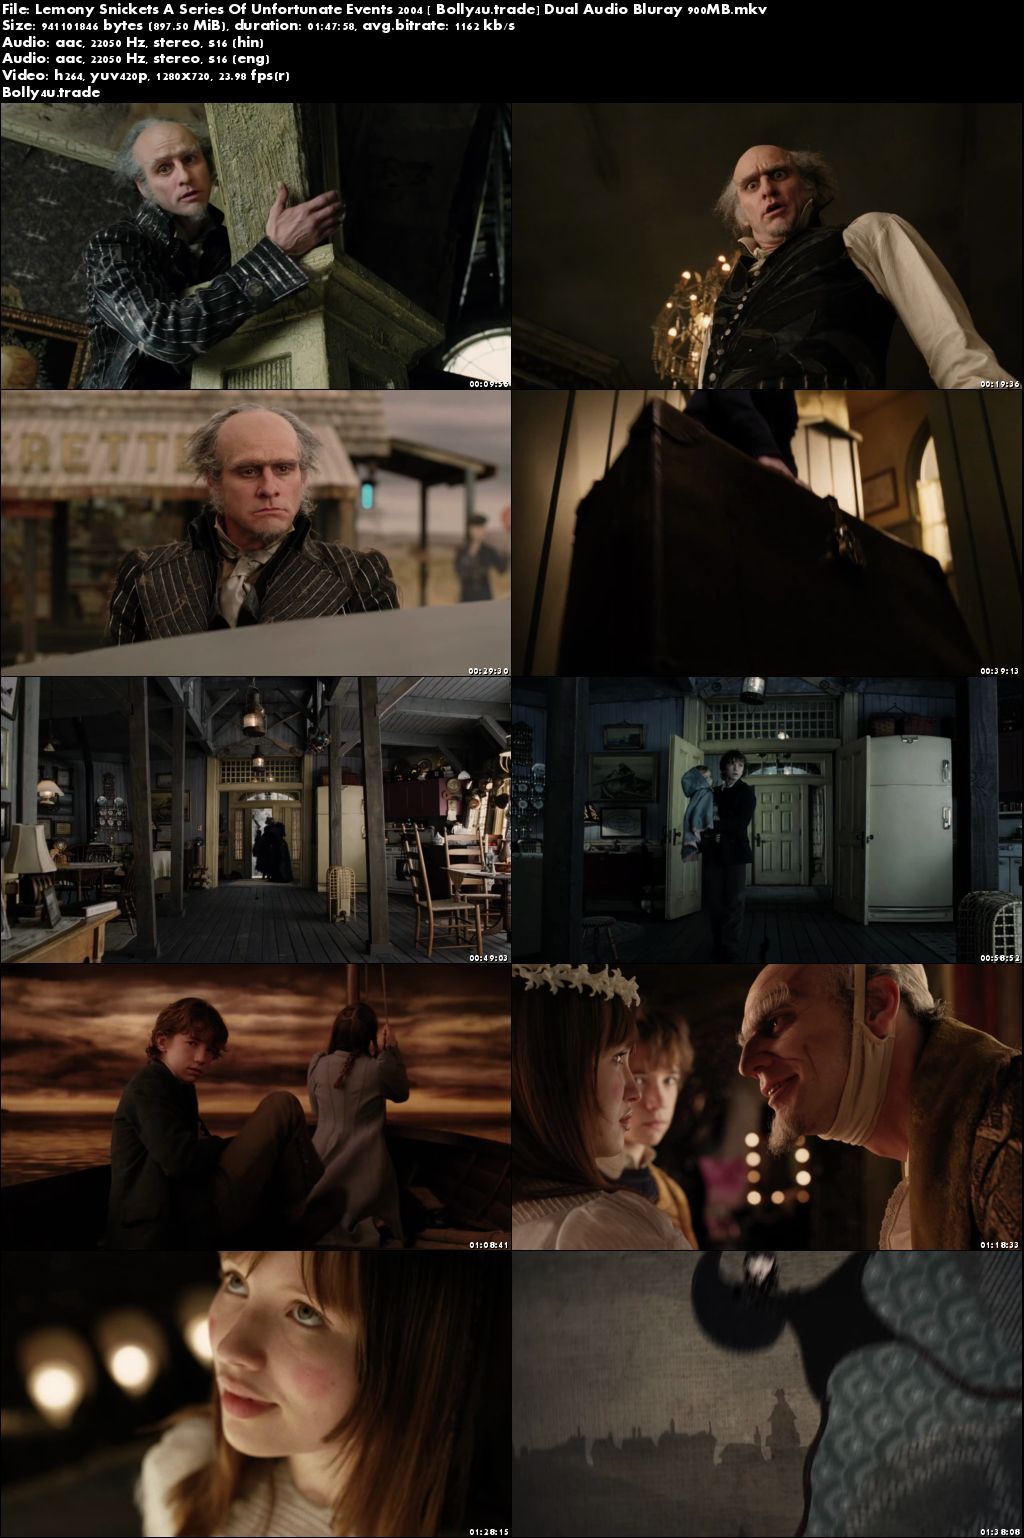 Lemony Snickets A Series Of Unfortunate Events 2004 BRRip 300Mb Hindi Dual Audio 480p Download